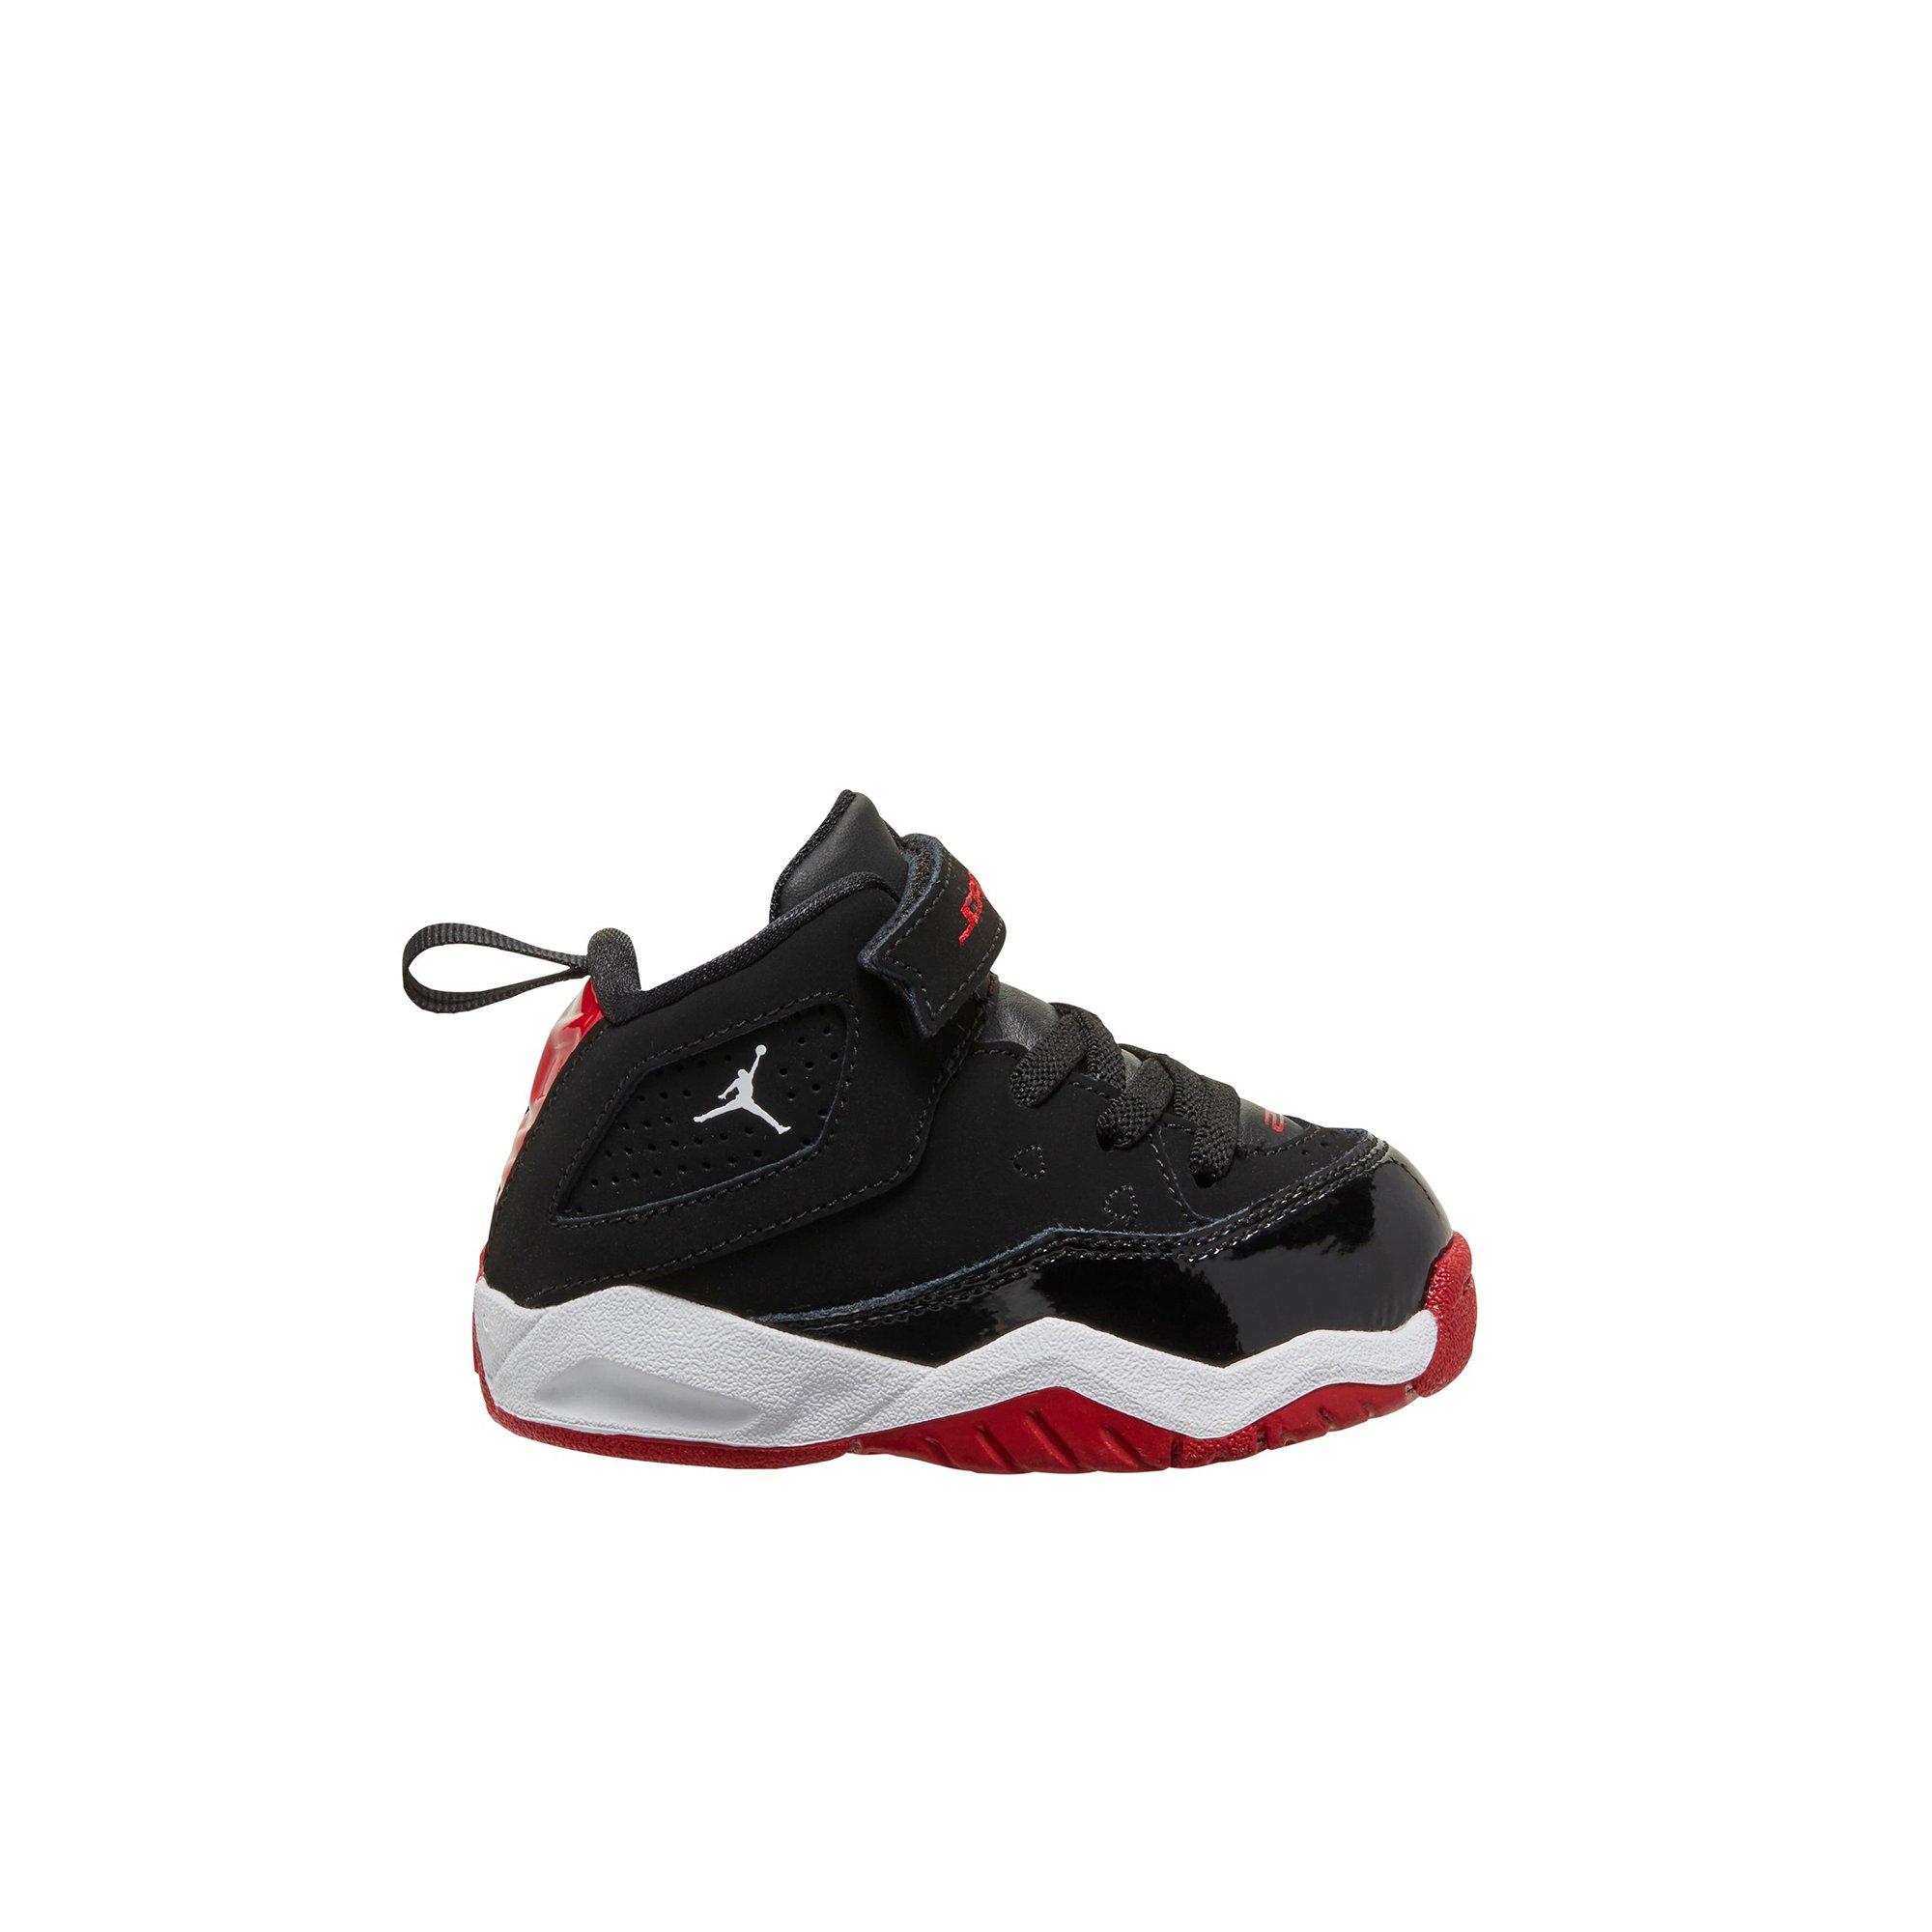 red jordan shoes for toddlers